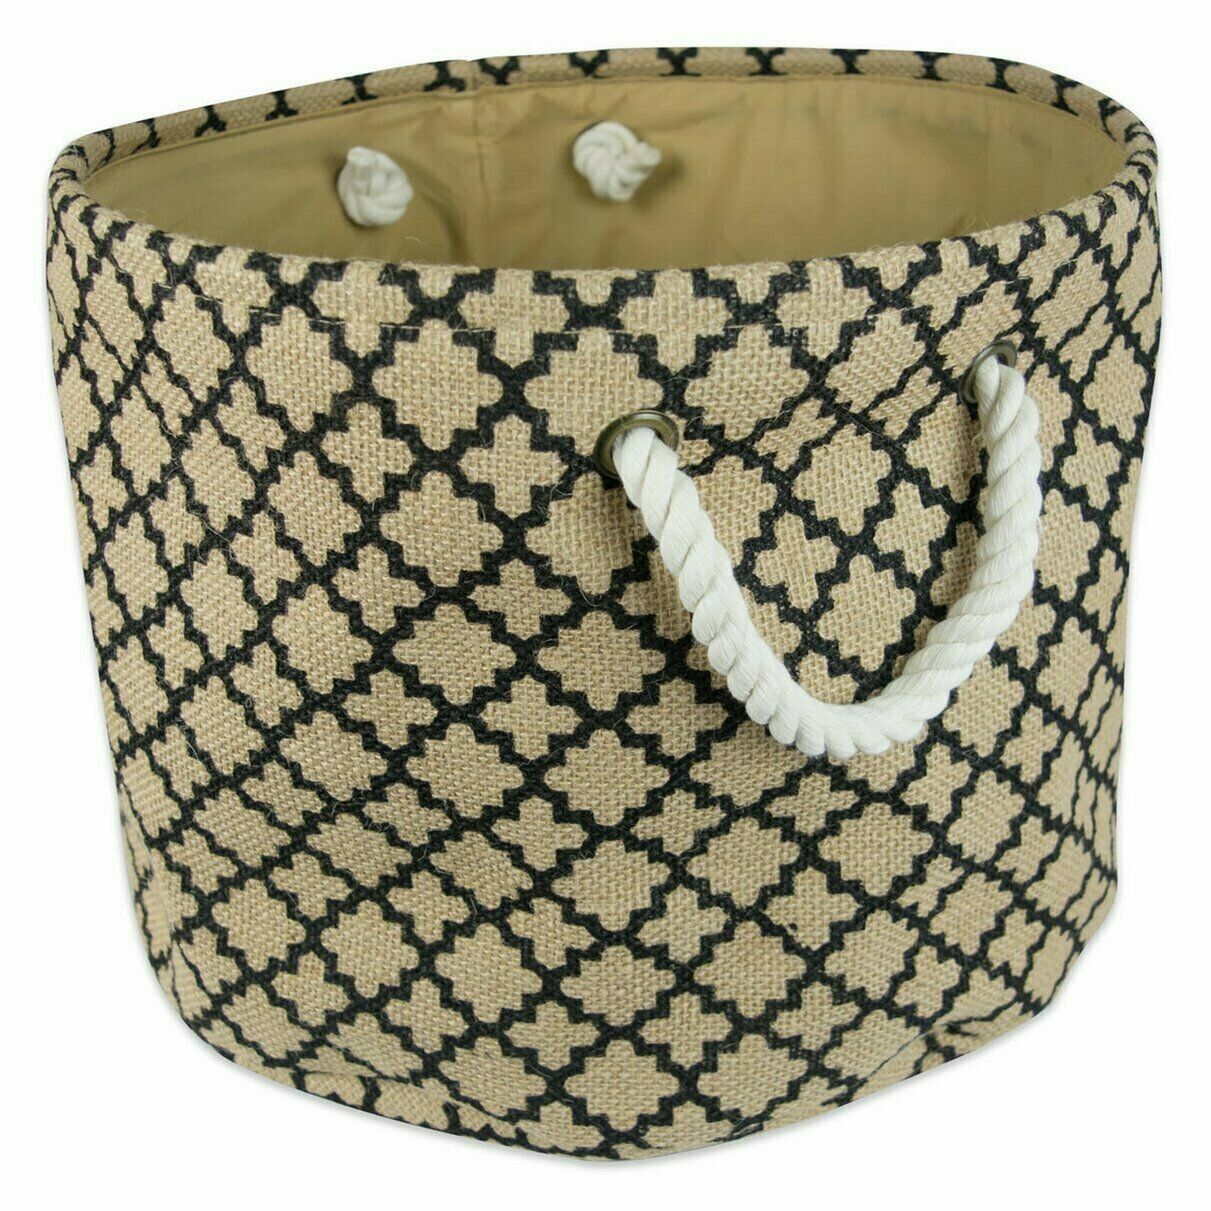 Jute Storage Bin with Rope Handles - 15 inches